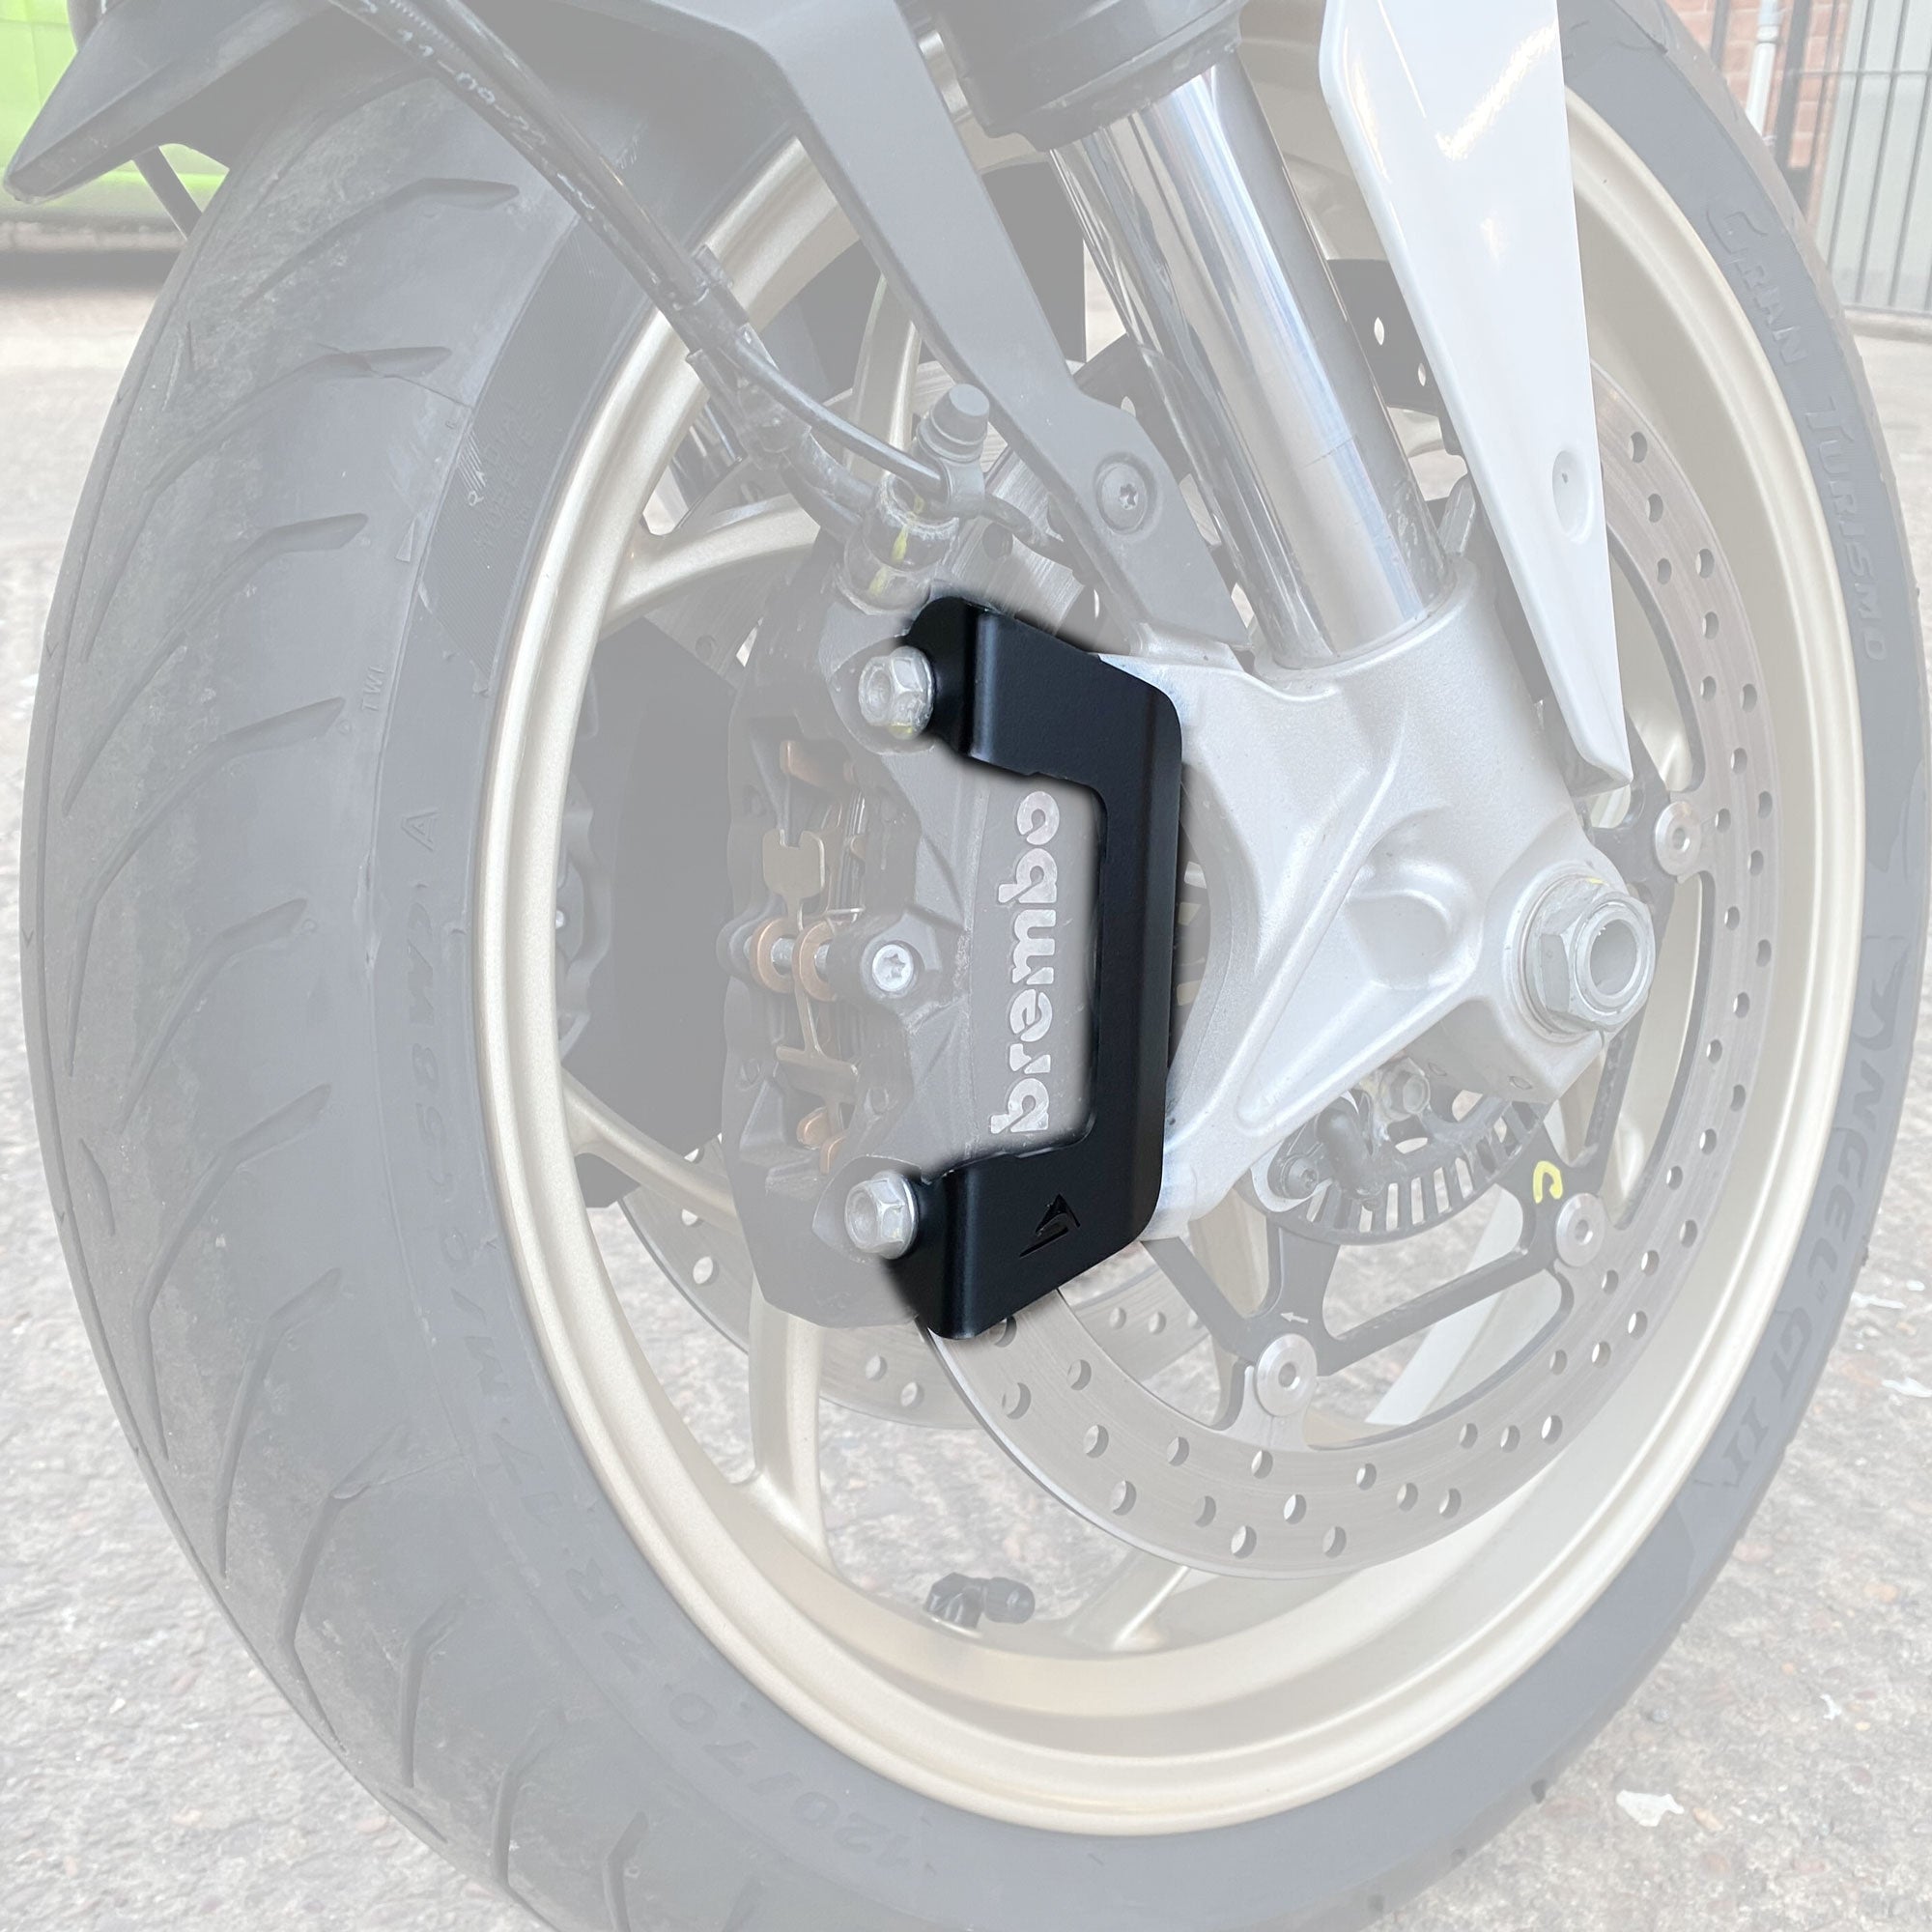 Pyramid Brake Caliper Guards | Matte Black | Ducati Monster 937 2021>Current-36875M-Crash Protection-Pyramid Motorcycle Accessories